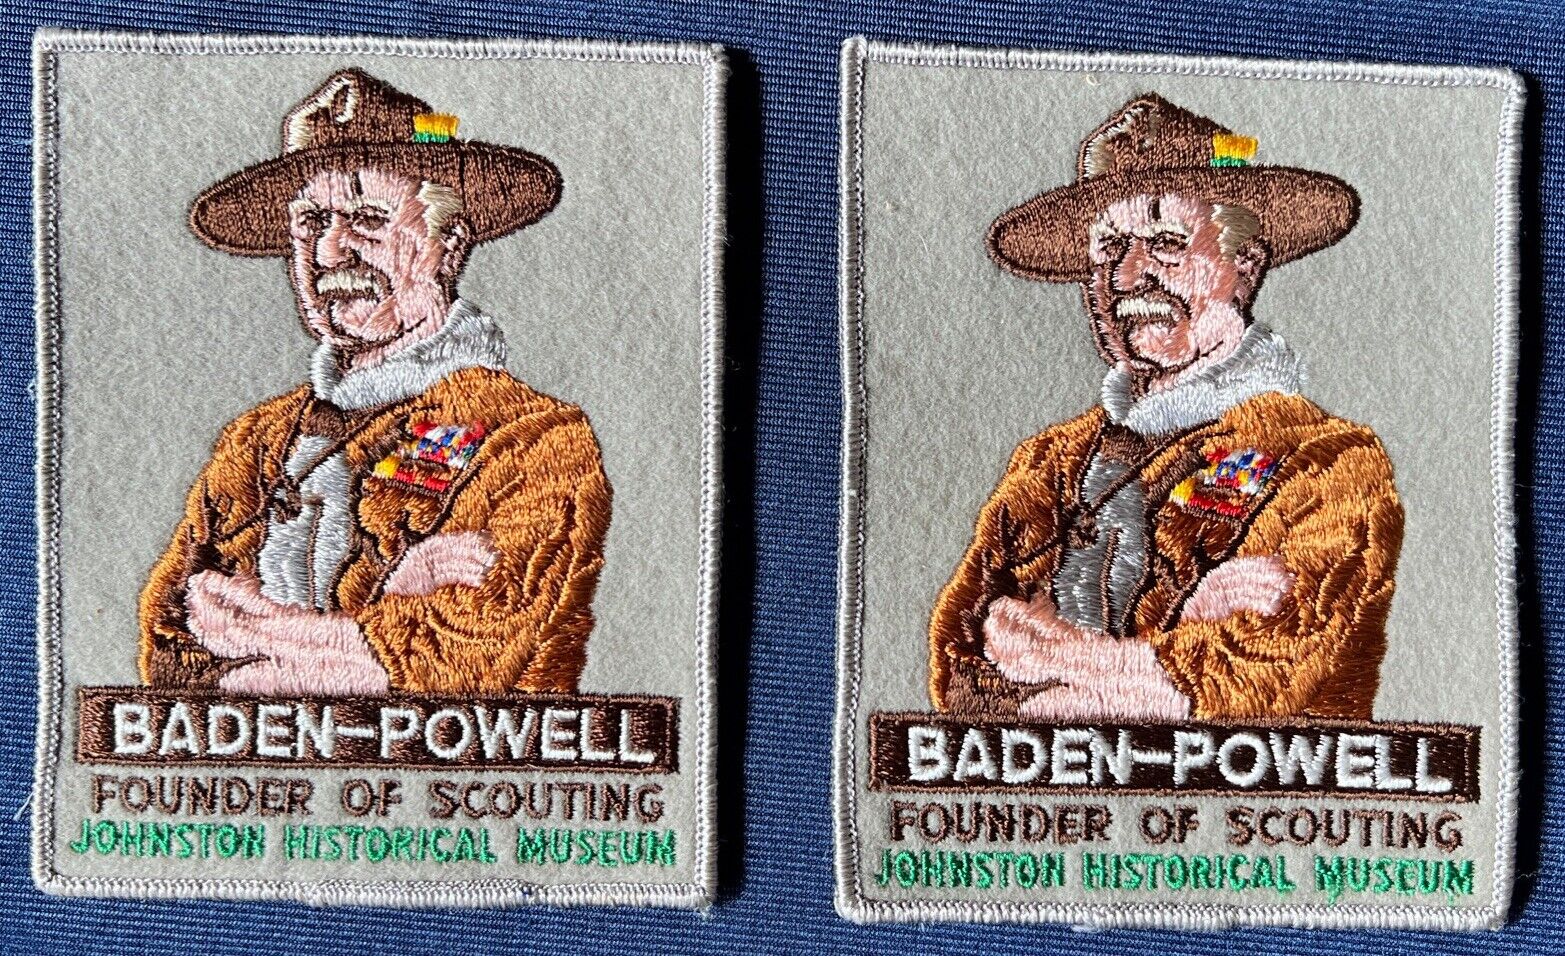 Boy Scout Baden Powell Johnston Historical Museum set of 2 matching Patches NEW